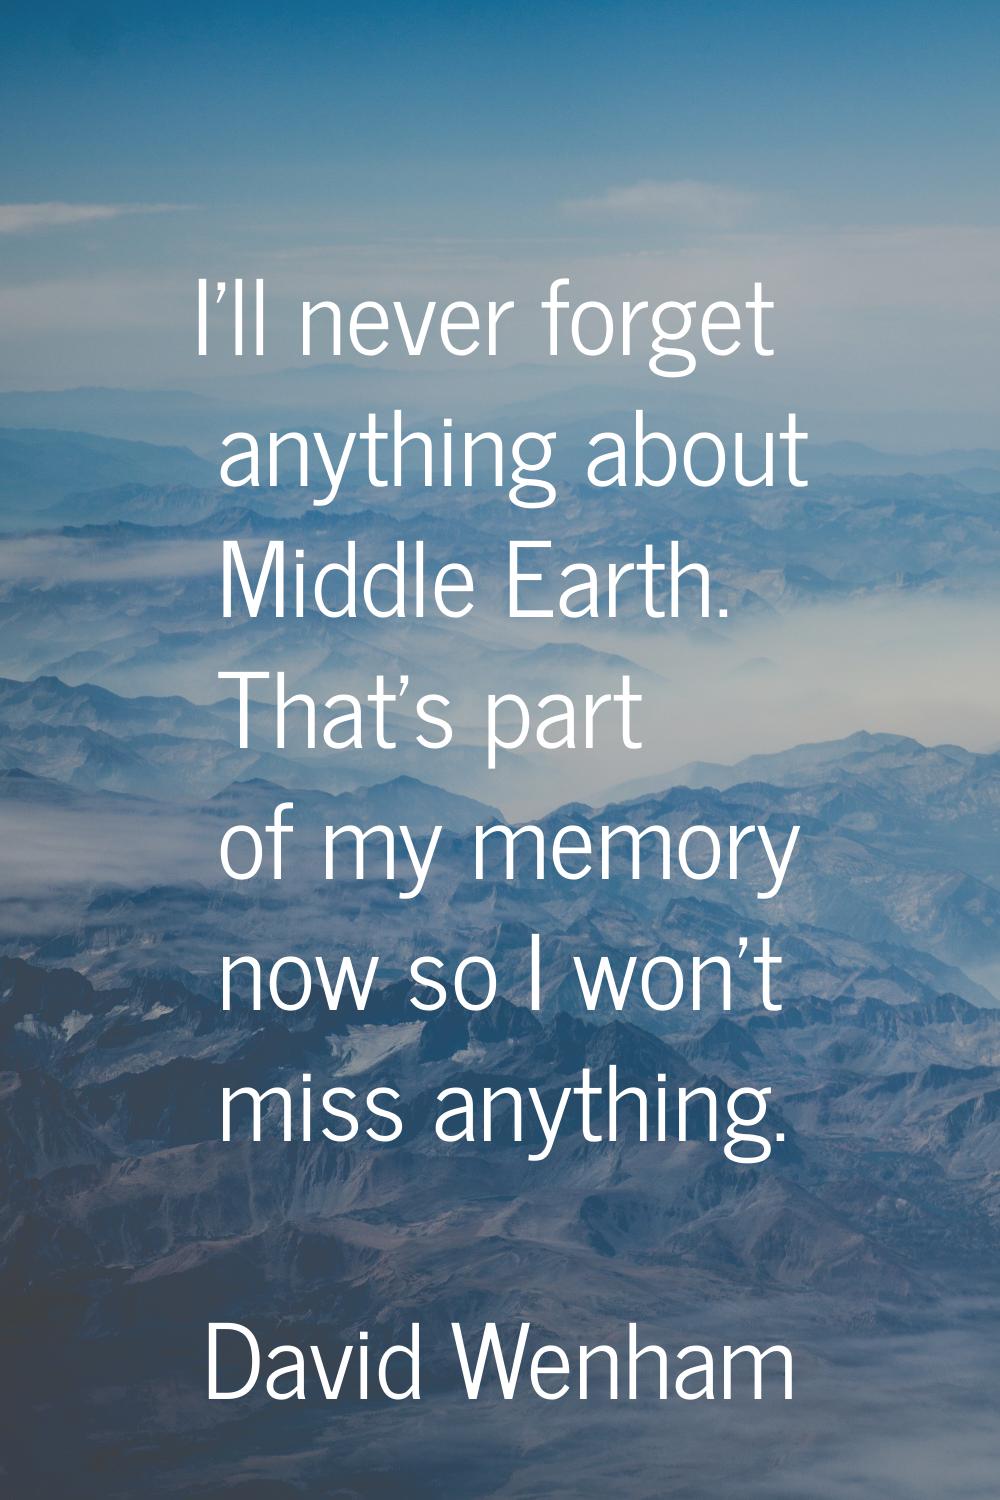 I'll never forget anything about Middle Earth. That's part of my memory now so I won't miss anythin